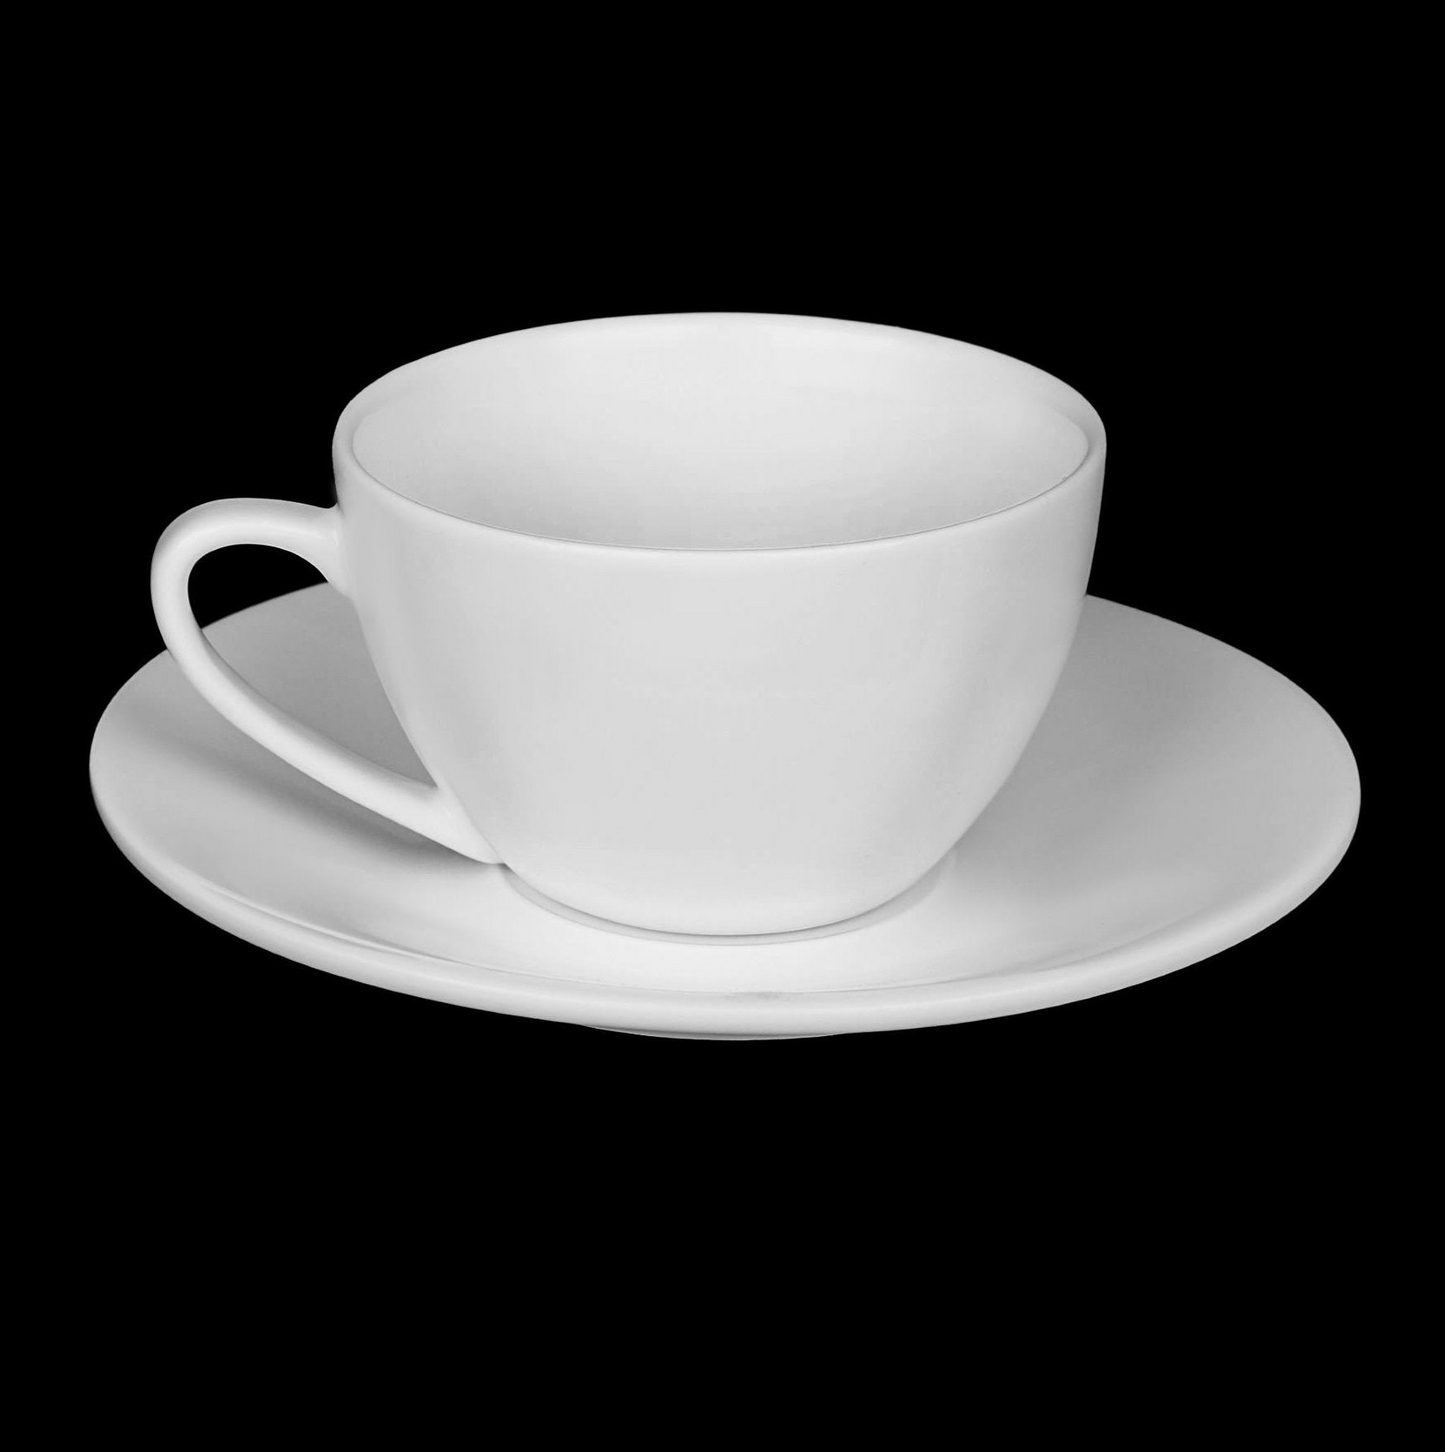 Wilmax [A] Fine Porcelain 6 Oz | 180 Ml Cappuccino Cup & Saucer WL-993001AB